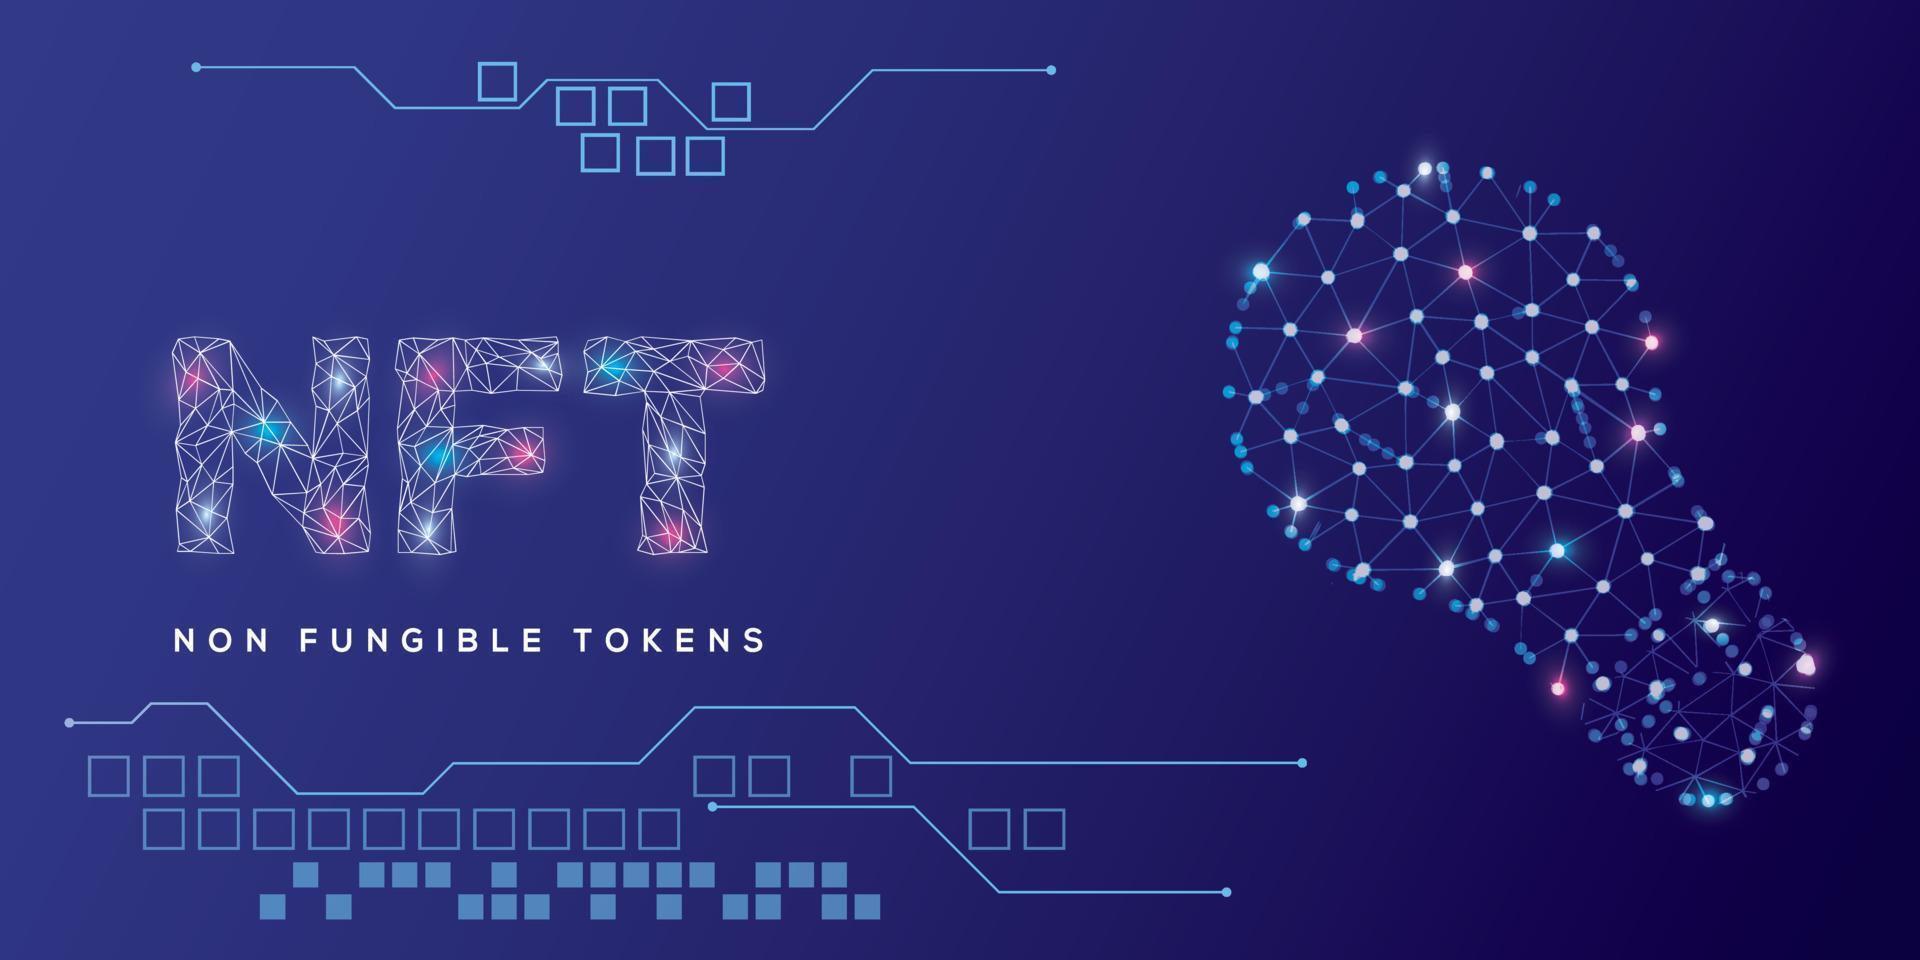 NFT nonfungible token wallpaper with futuristic node effect and lights vector